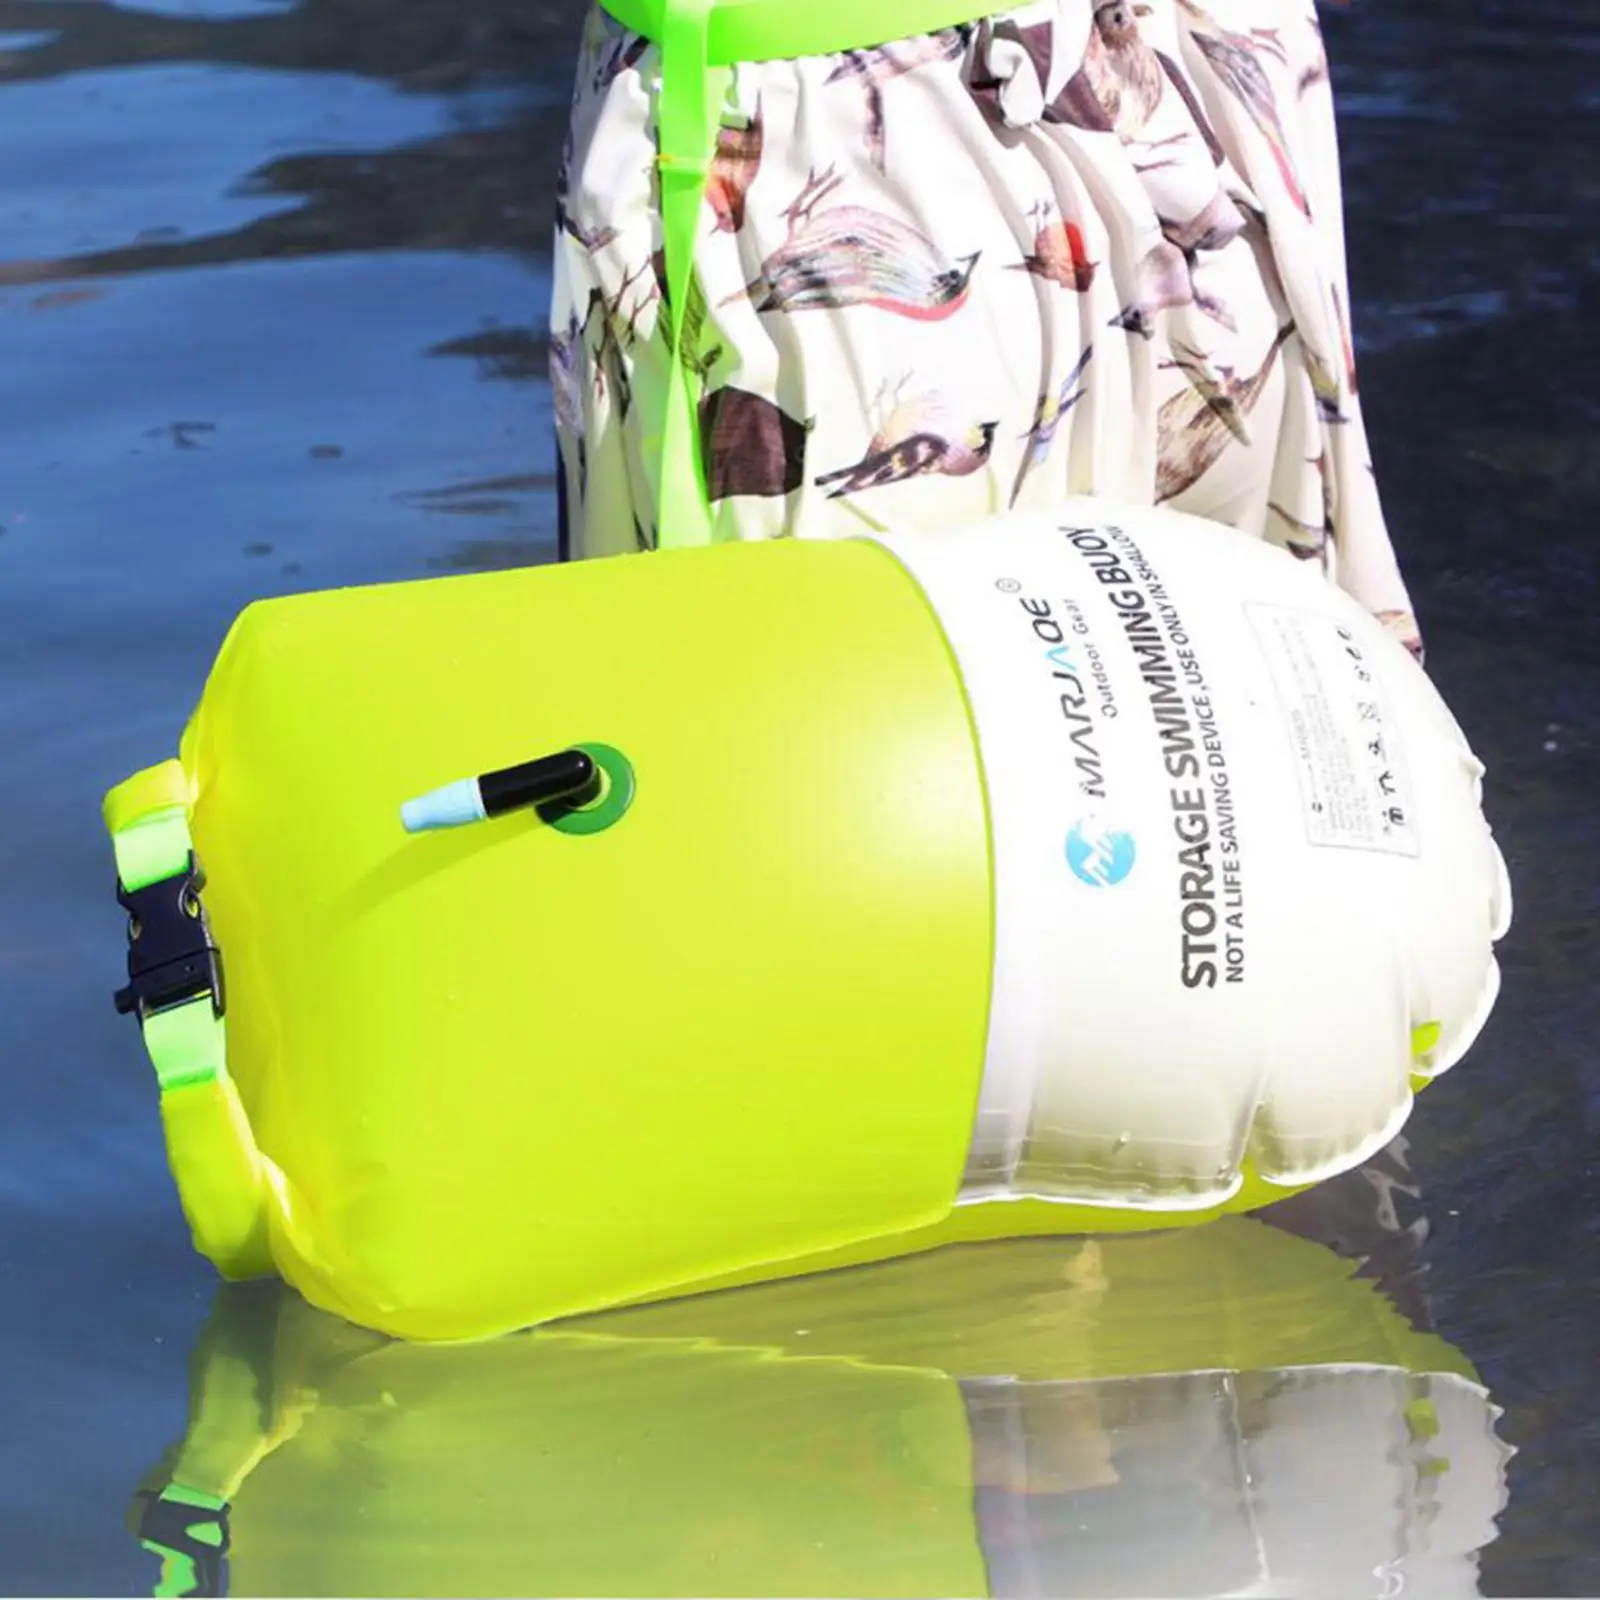 Visible PVC Swim Buoy Safety Swimming Float Dry Bag for Open Water Swimmers